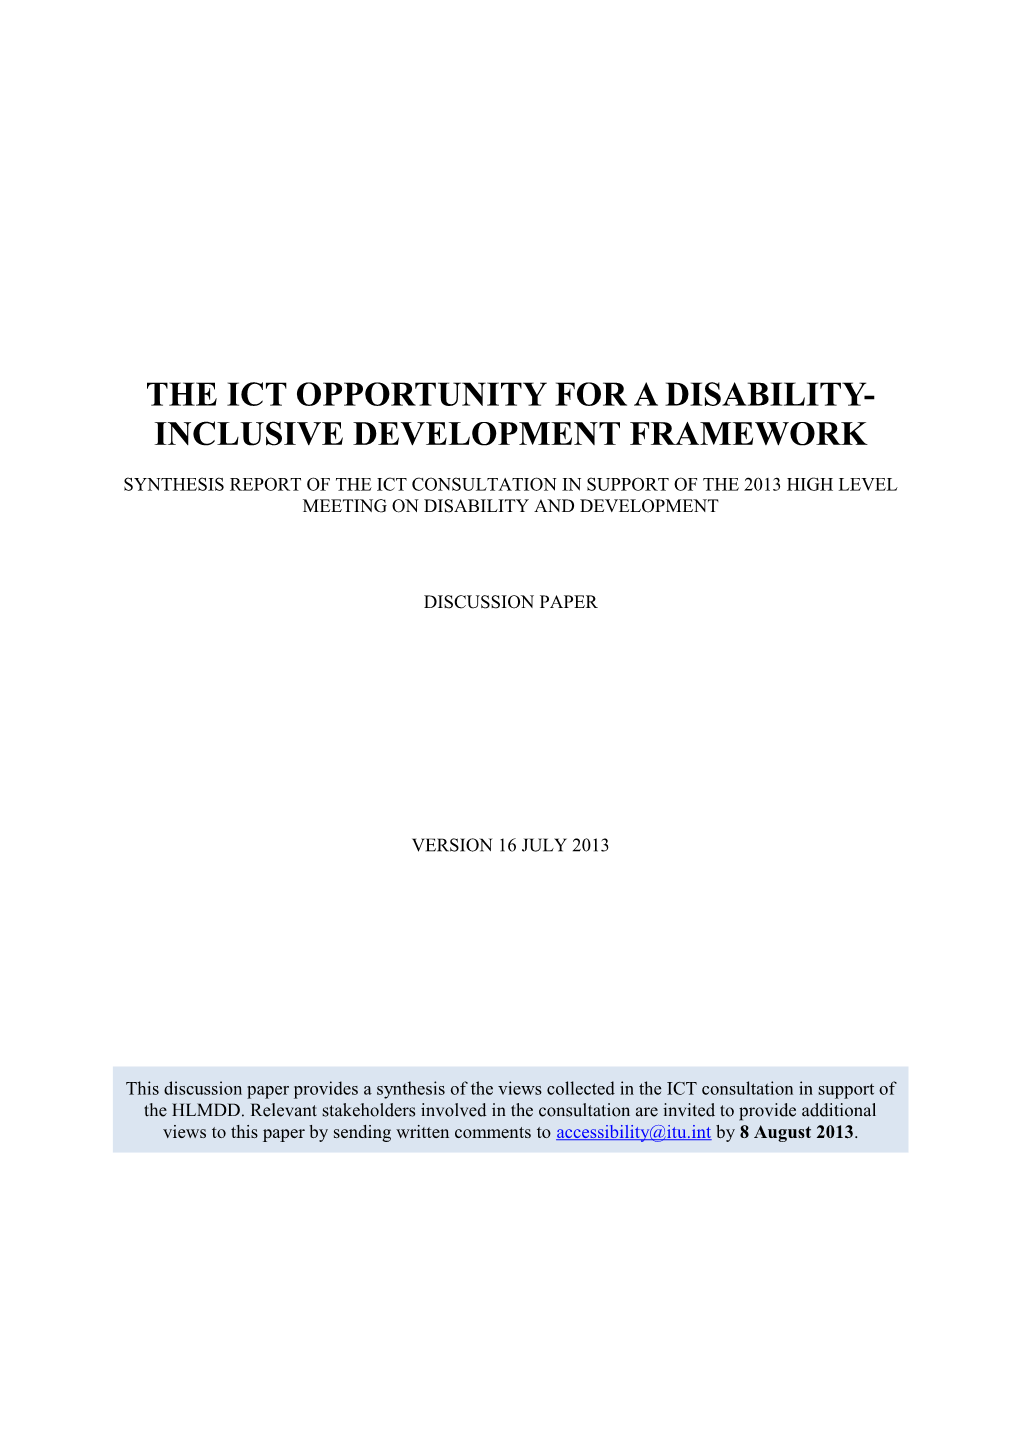 Discussion Paper Icts Disability & Development